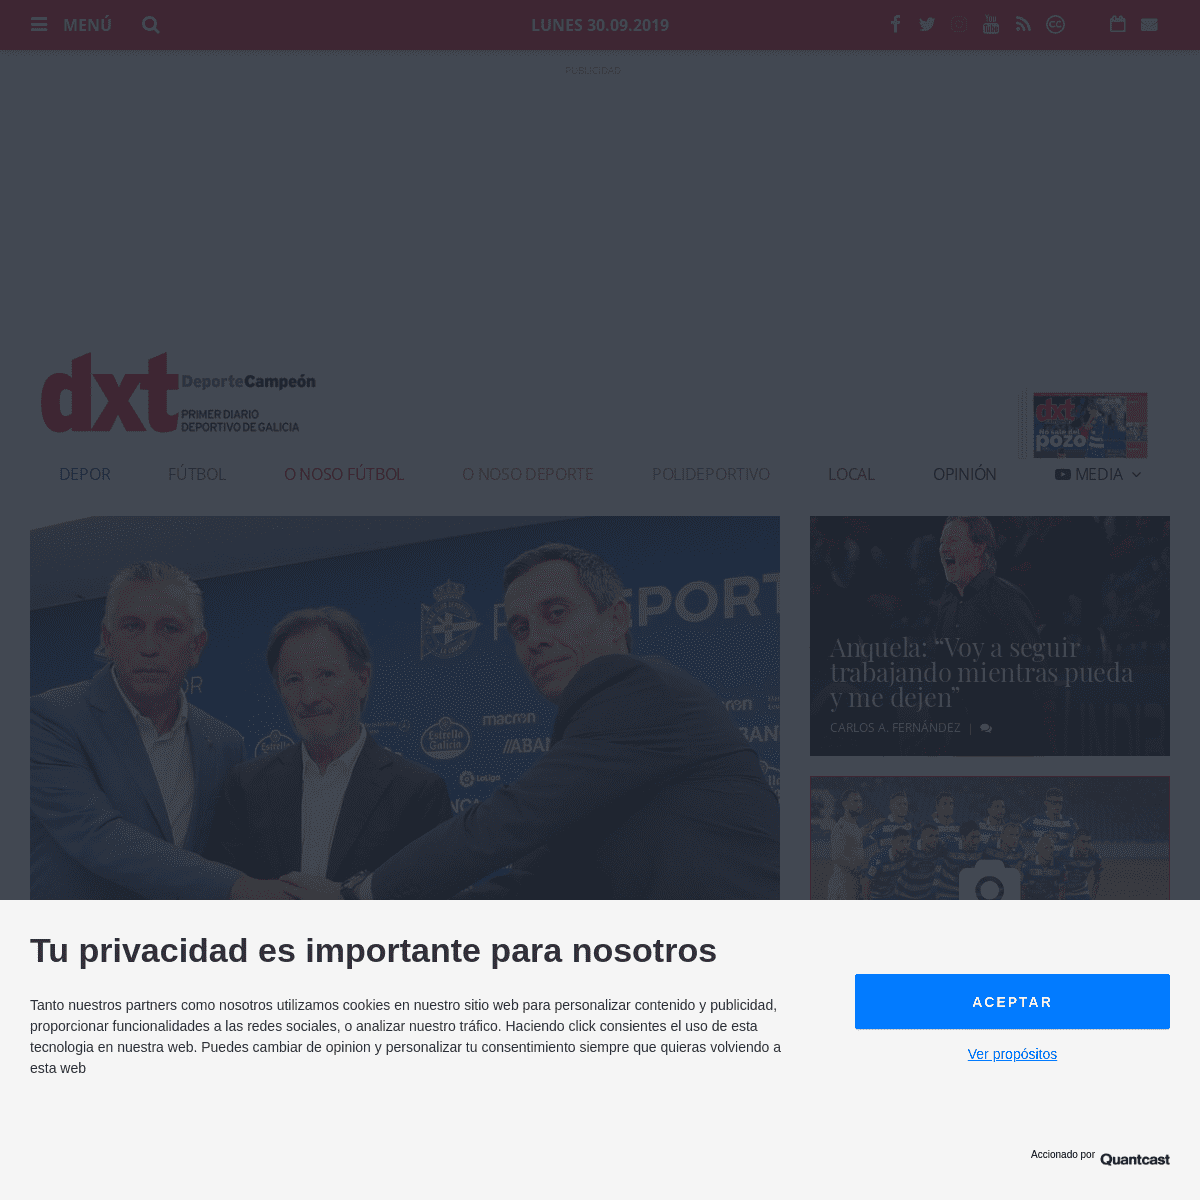 A complete backup of dxtcampeon.com